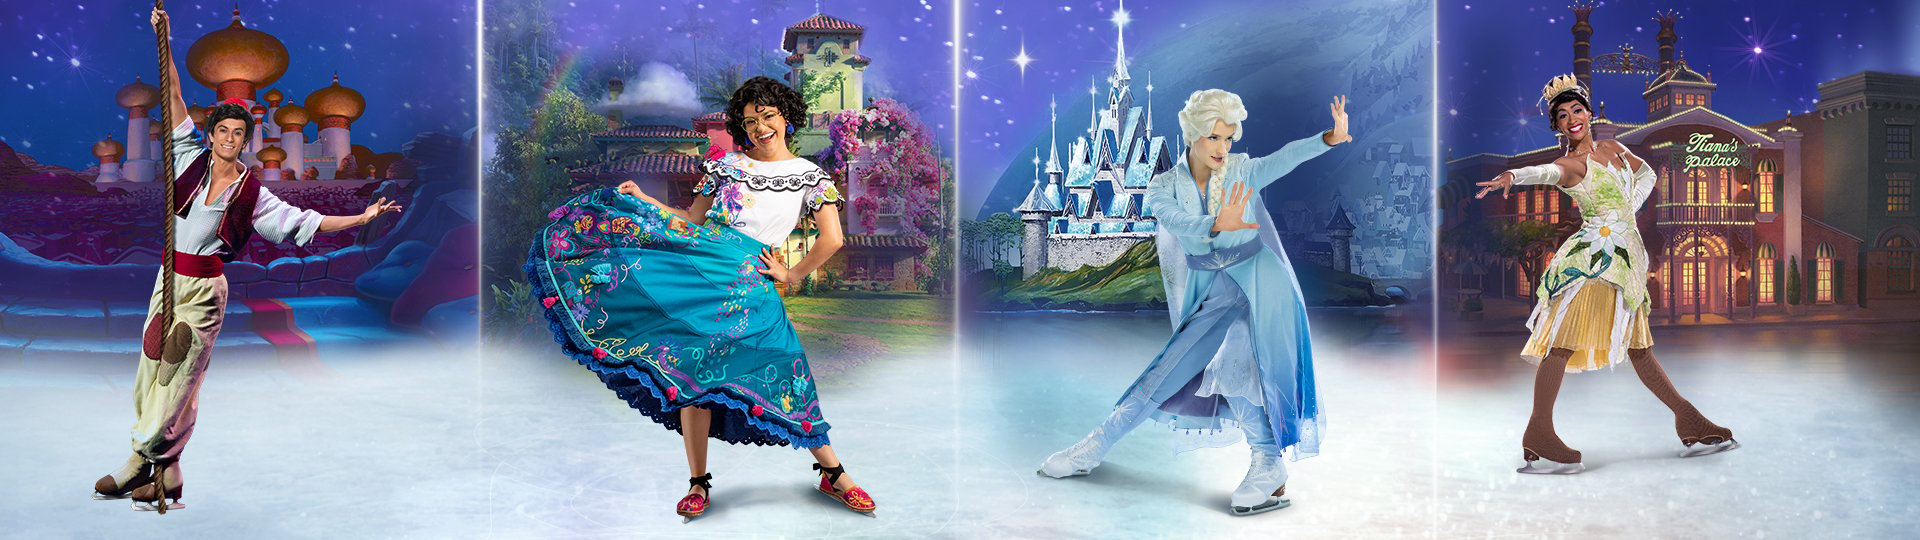 ANNOUNCING THE NEWEST DISNEY ON ICE SHOW!